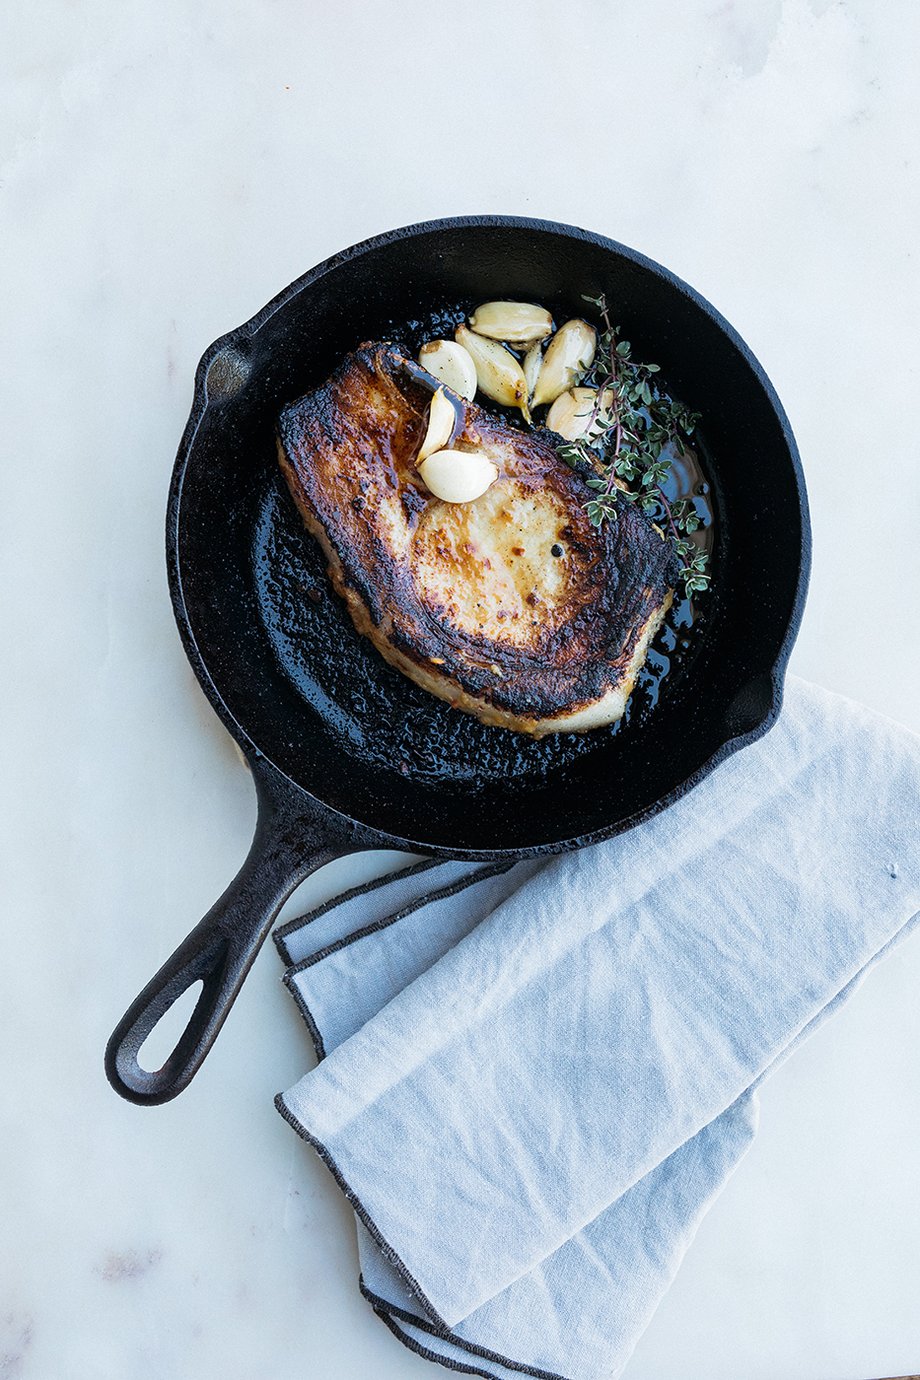 Cast iron pan featuring a seared pork chop and garlic with herbs shot by Mikaela Hamilton for the Women's Heritage Sourcebook